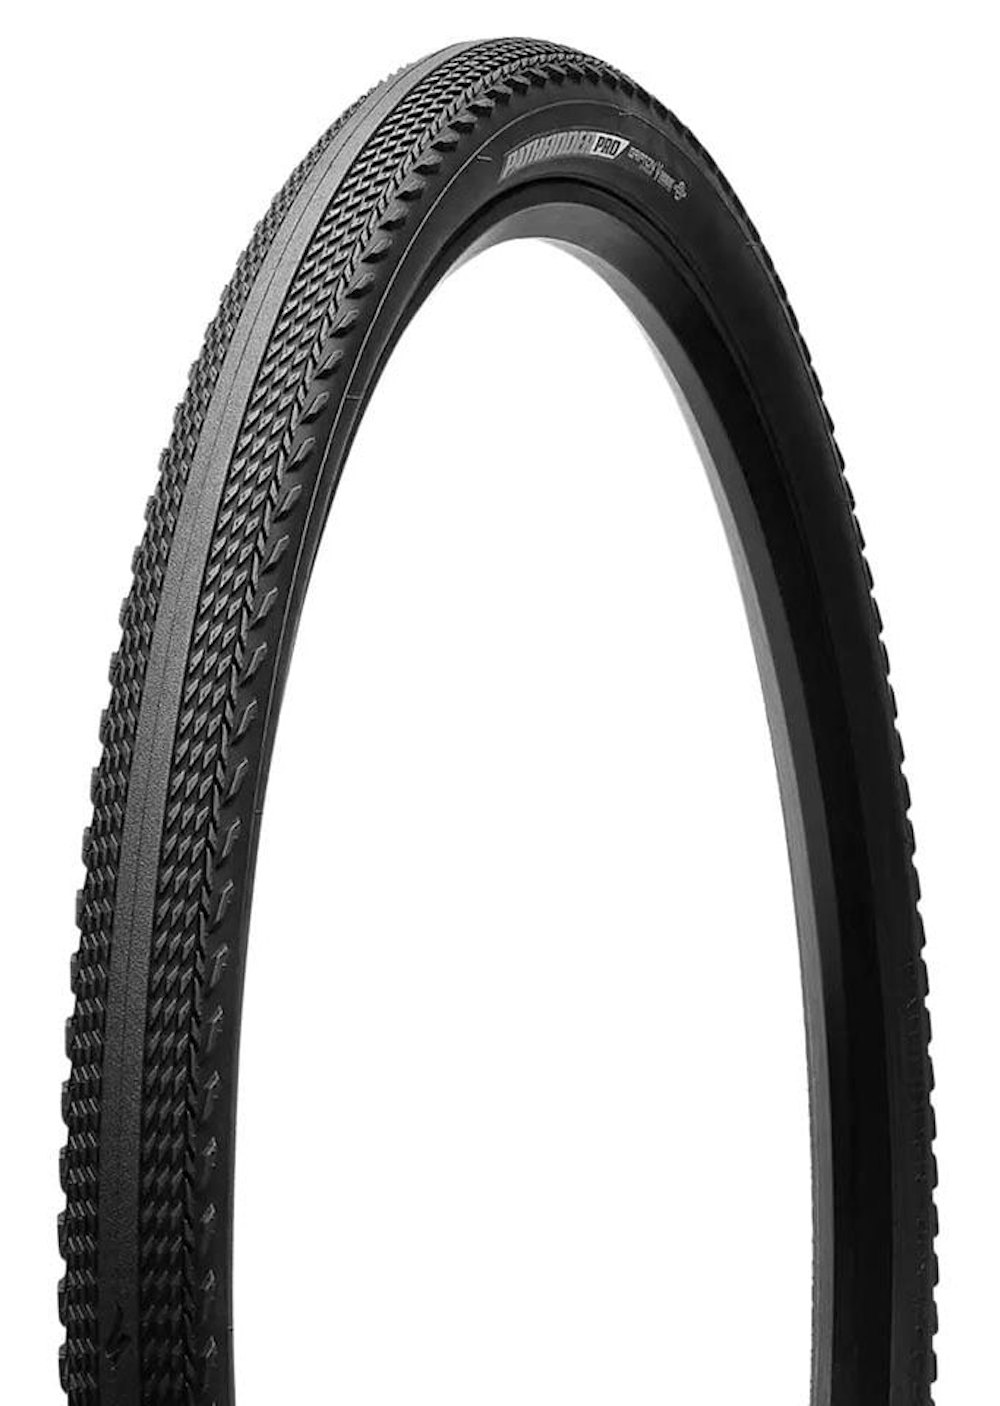 Specialized Pathfinder Pro 2Bliss Ready Tire